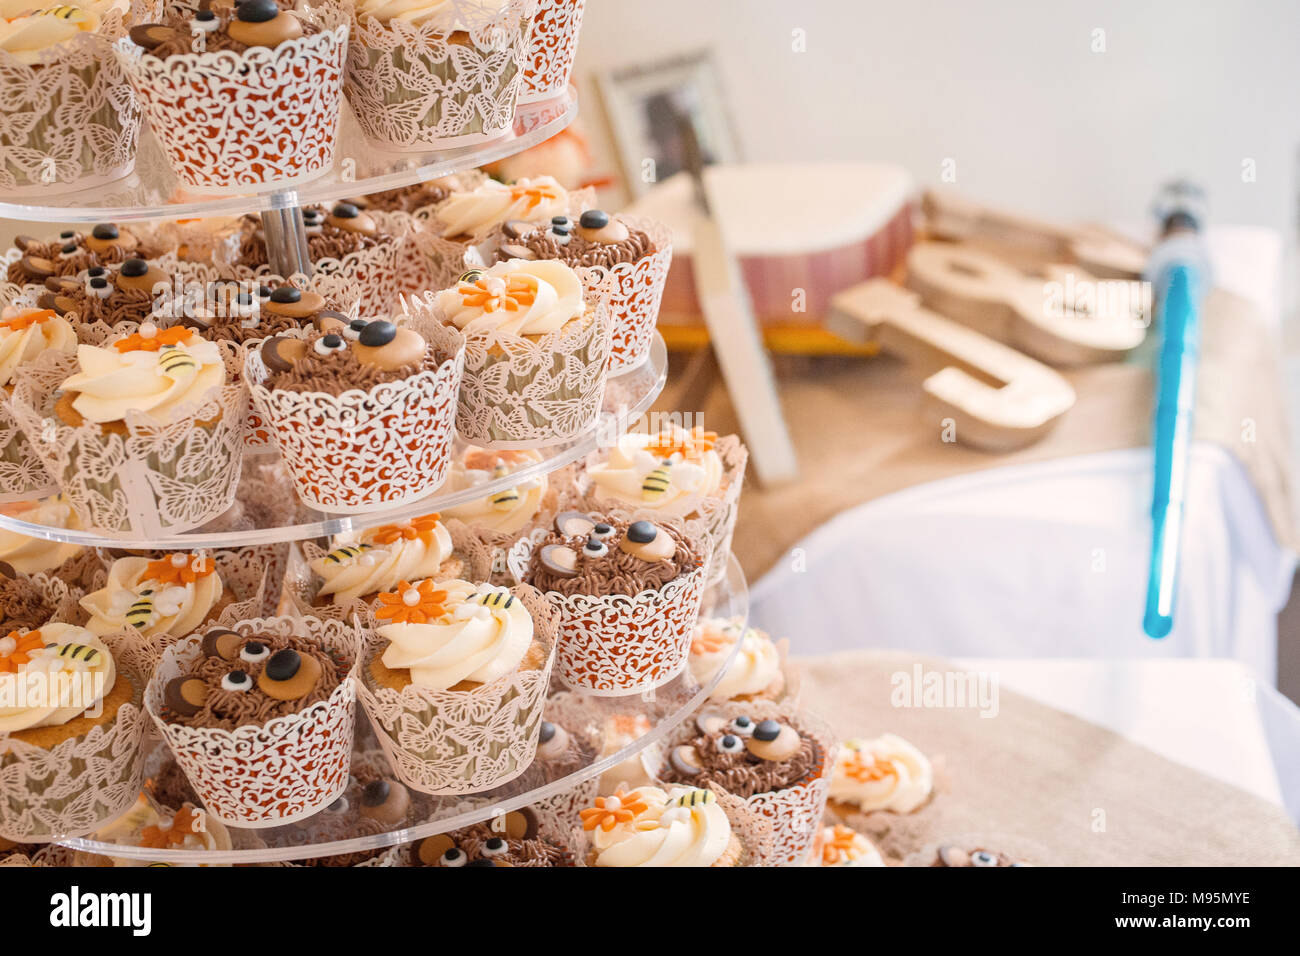 Cupcakes on cake stand at wedding Banque D'Images